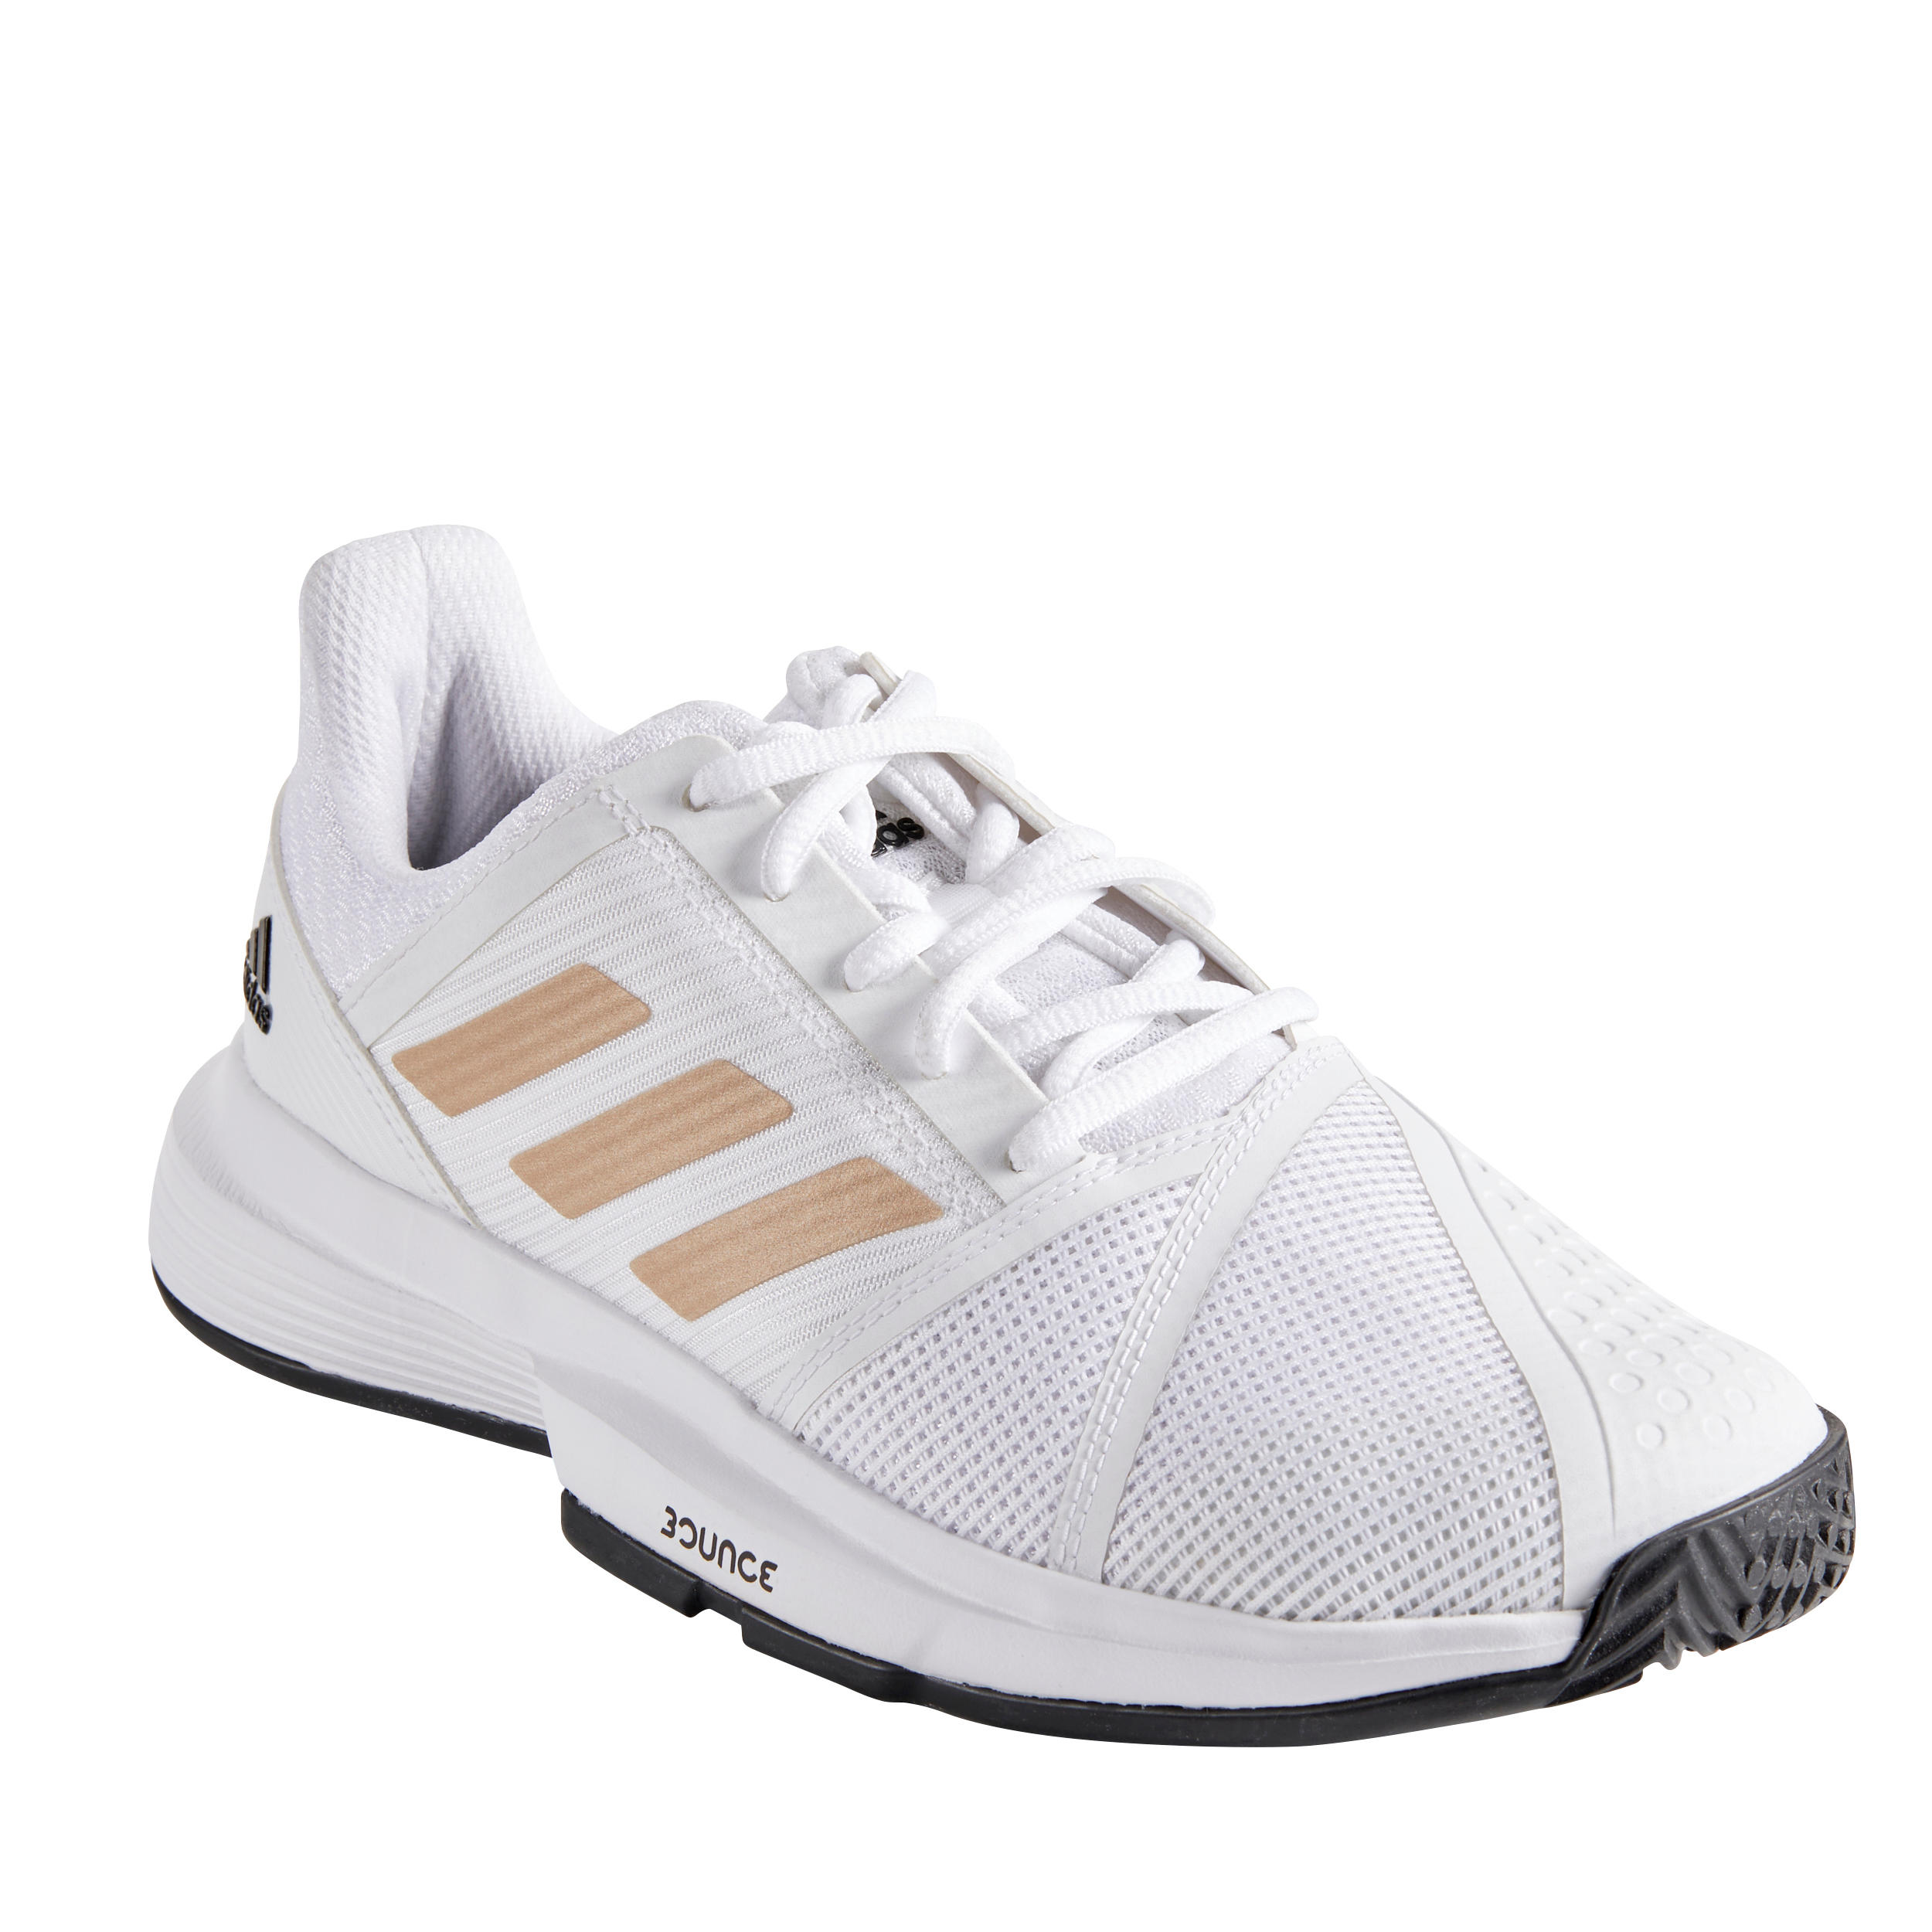 ADIDAS Women's Tennis Shoes CourtJam Bounce - White